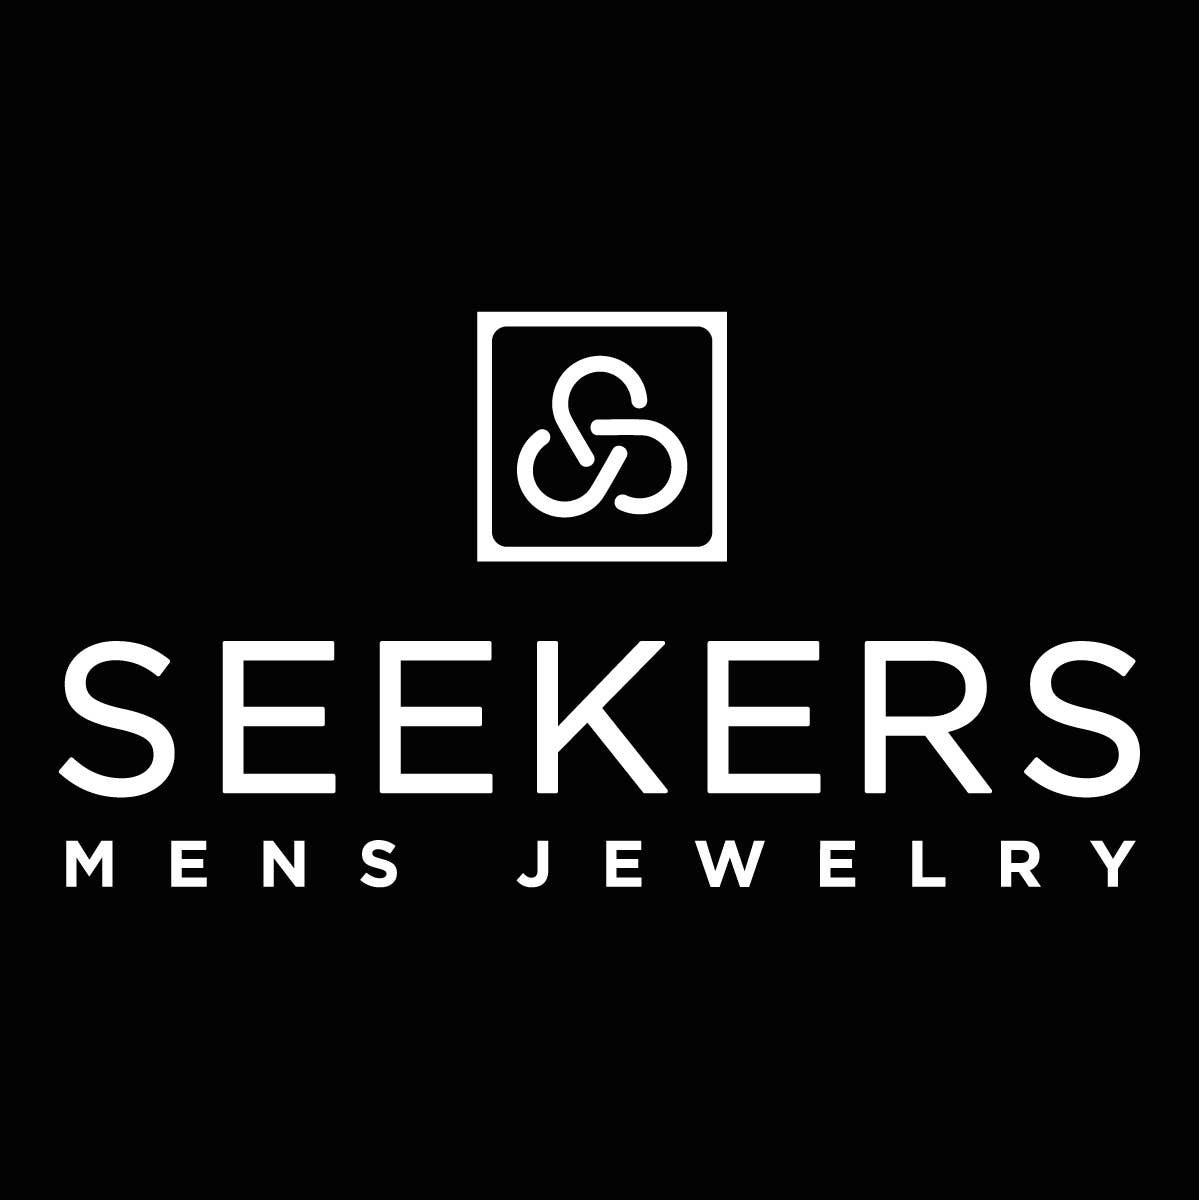 Seekers Men's Jewelry wholesale products